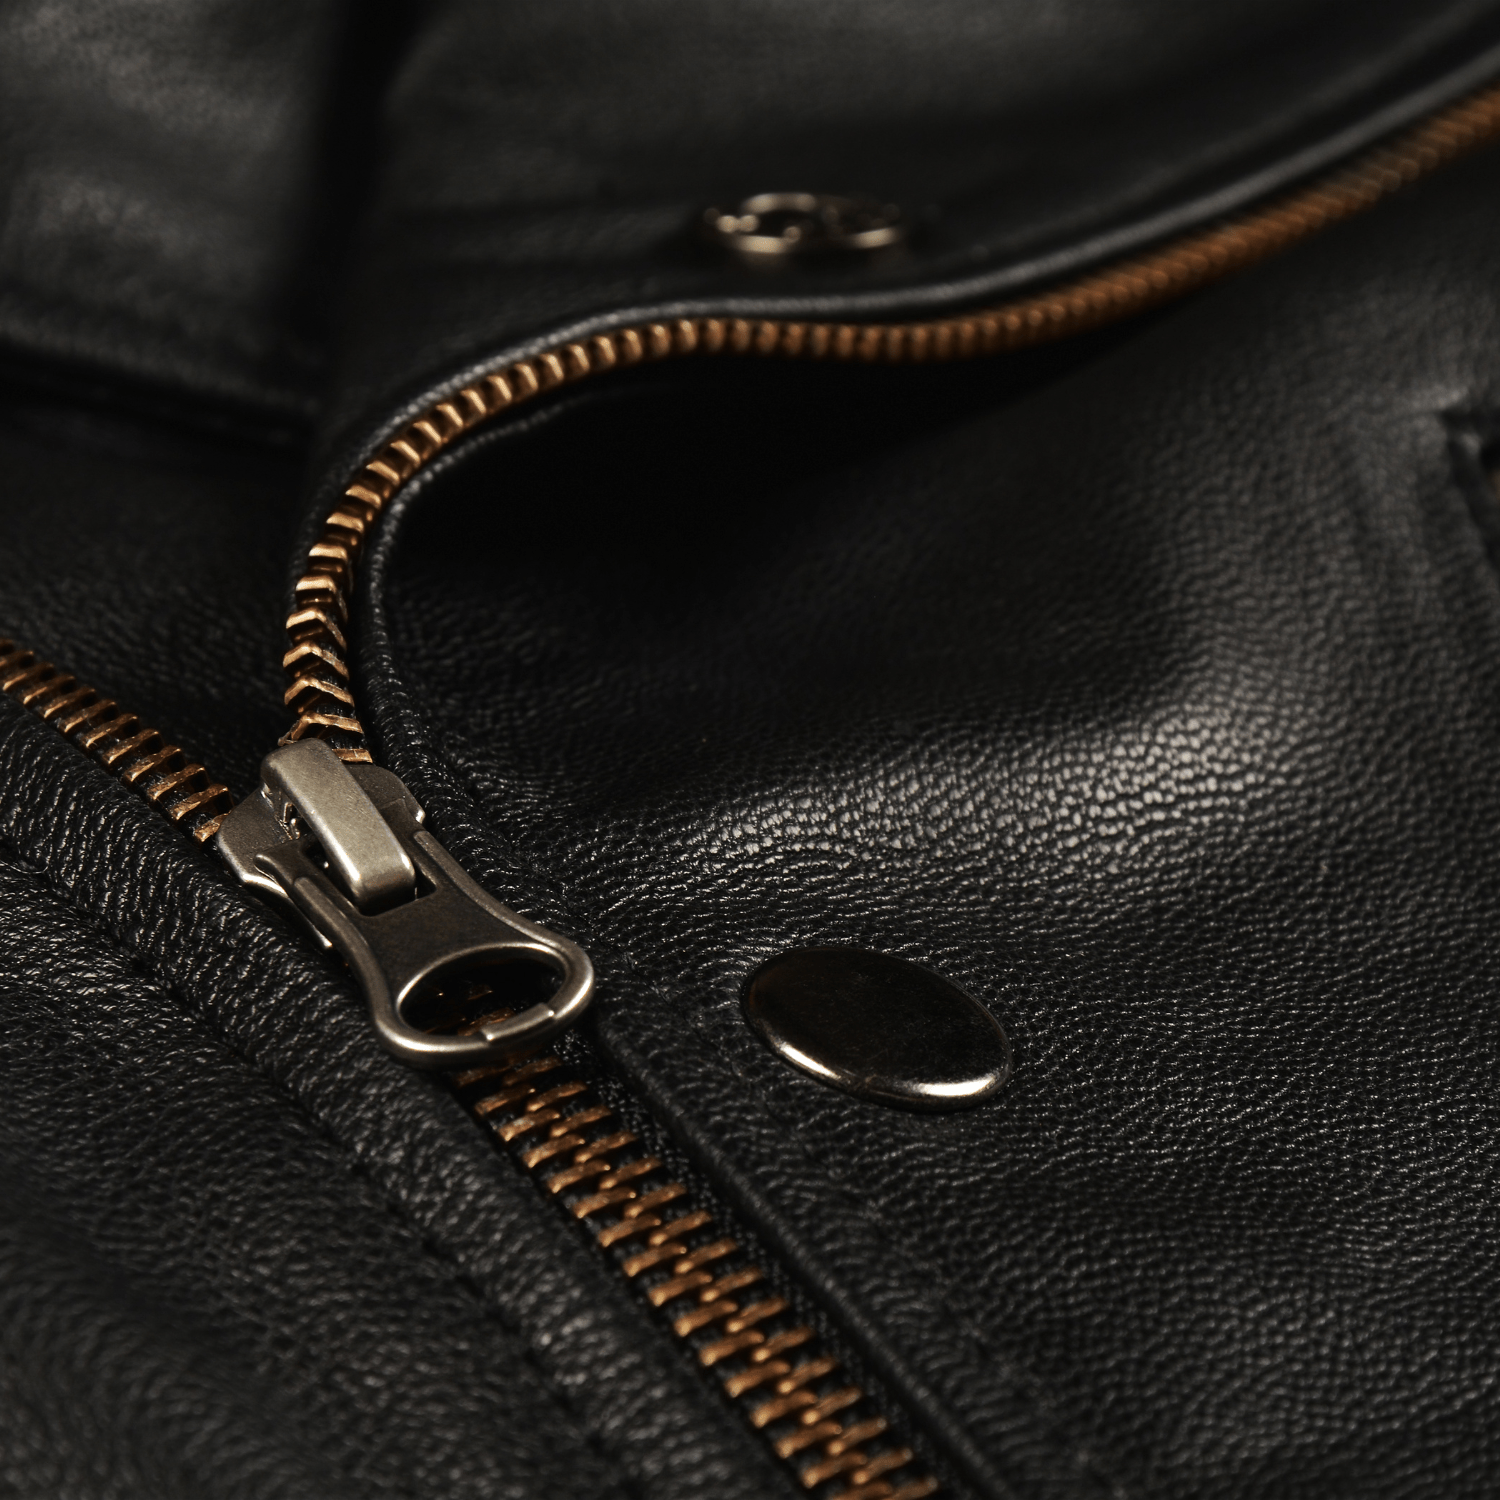 A Guide for Choosing a High-Quality Leather Jacket Zipper